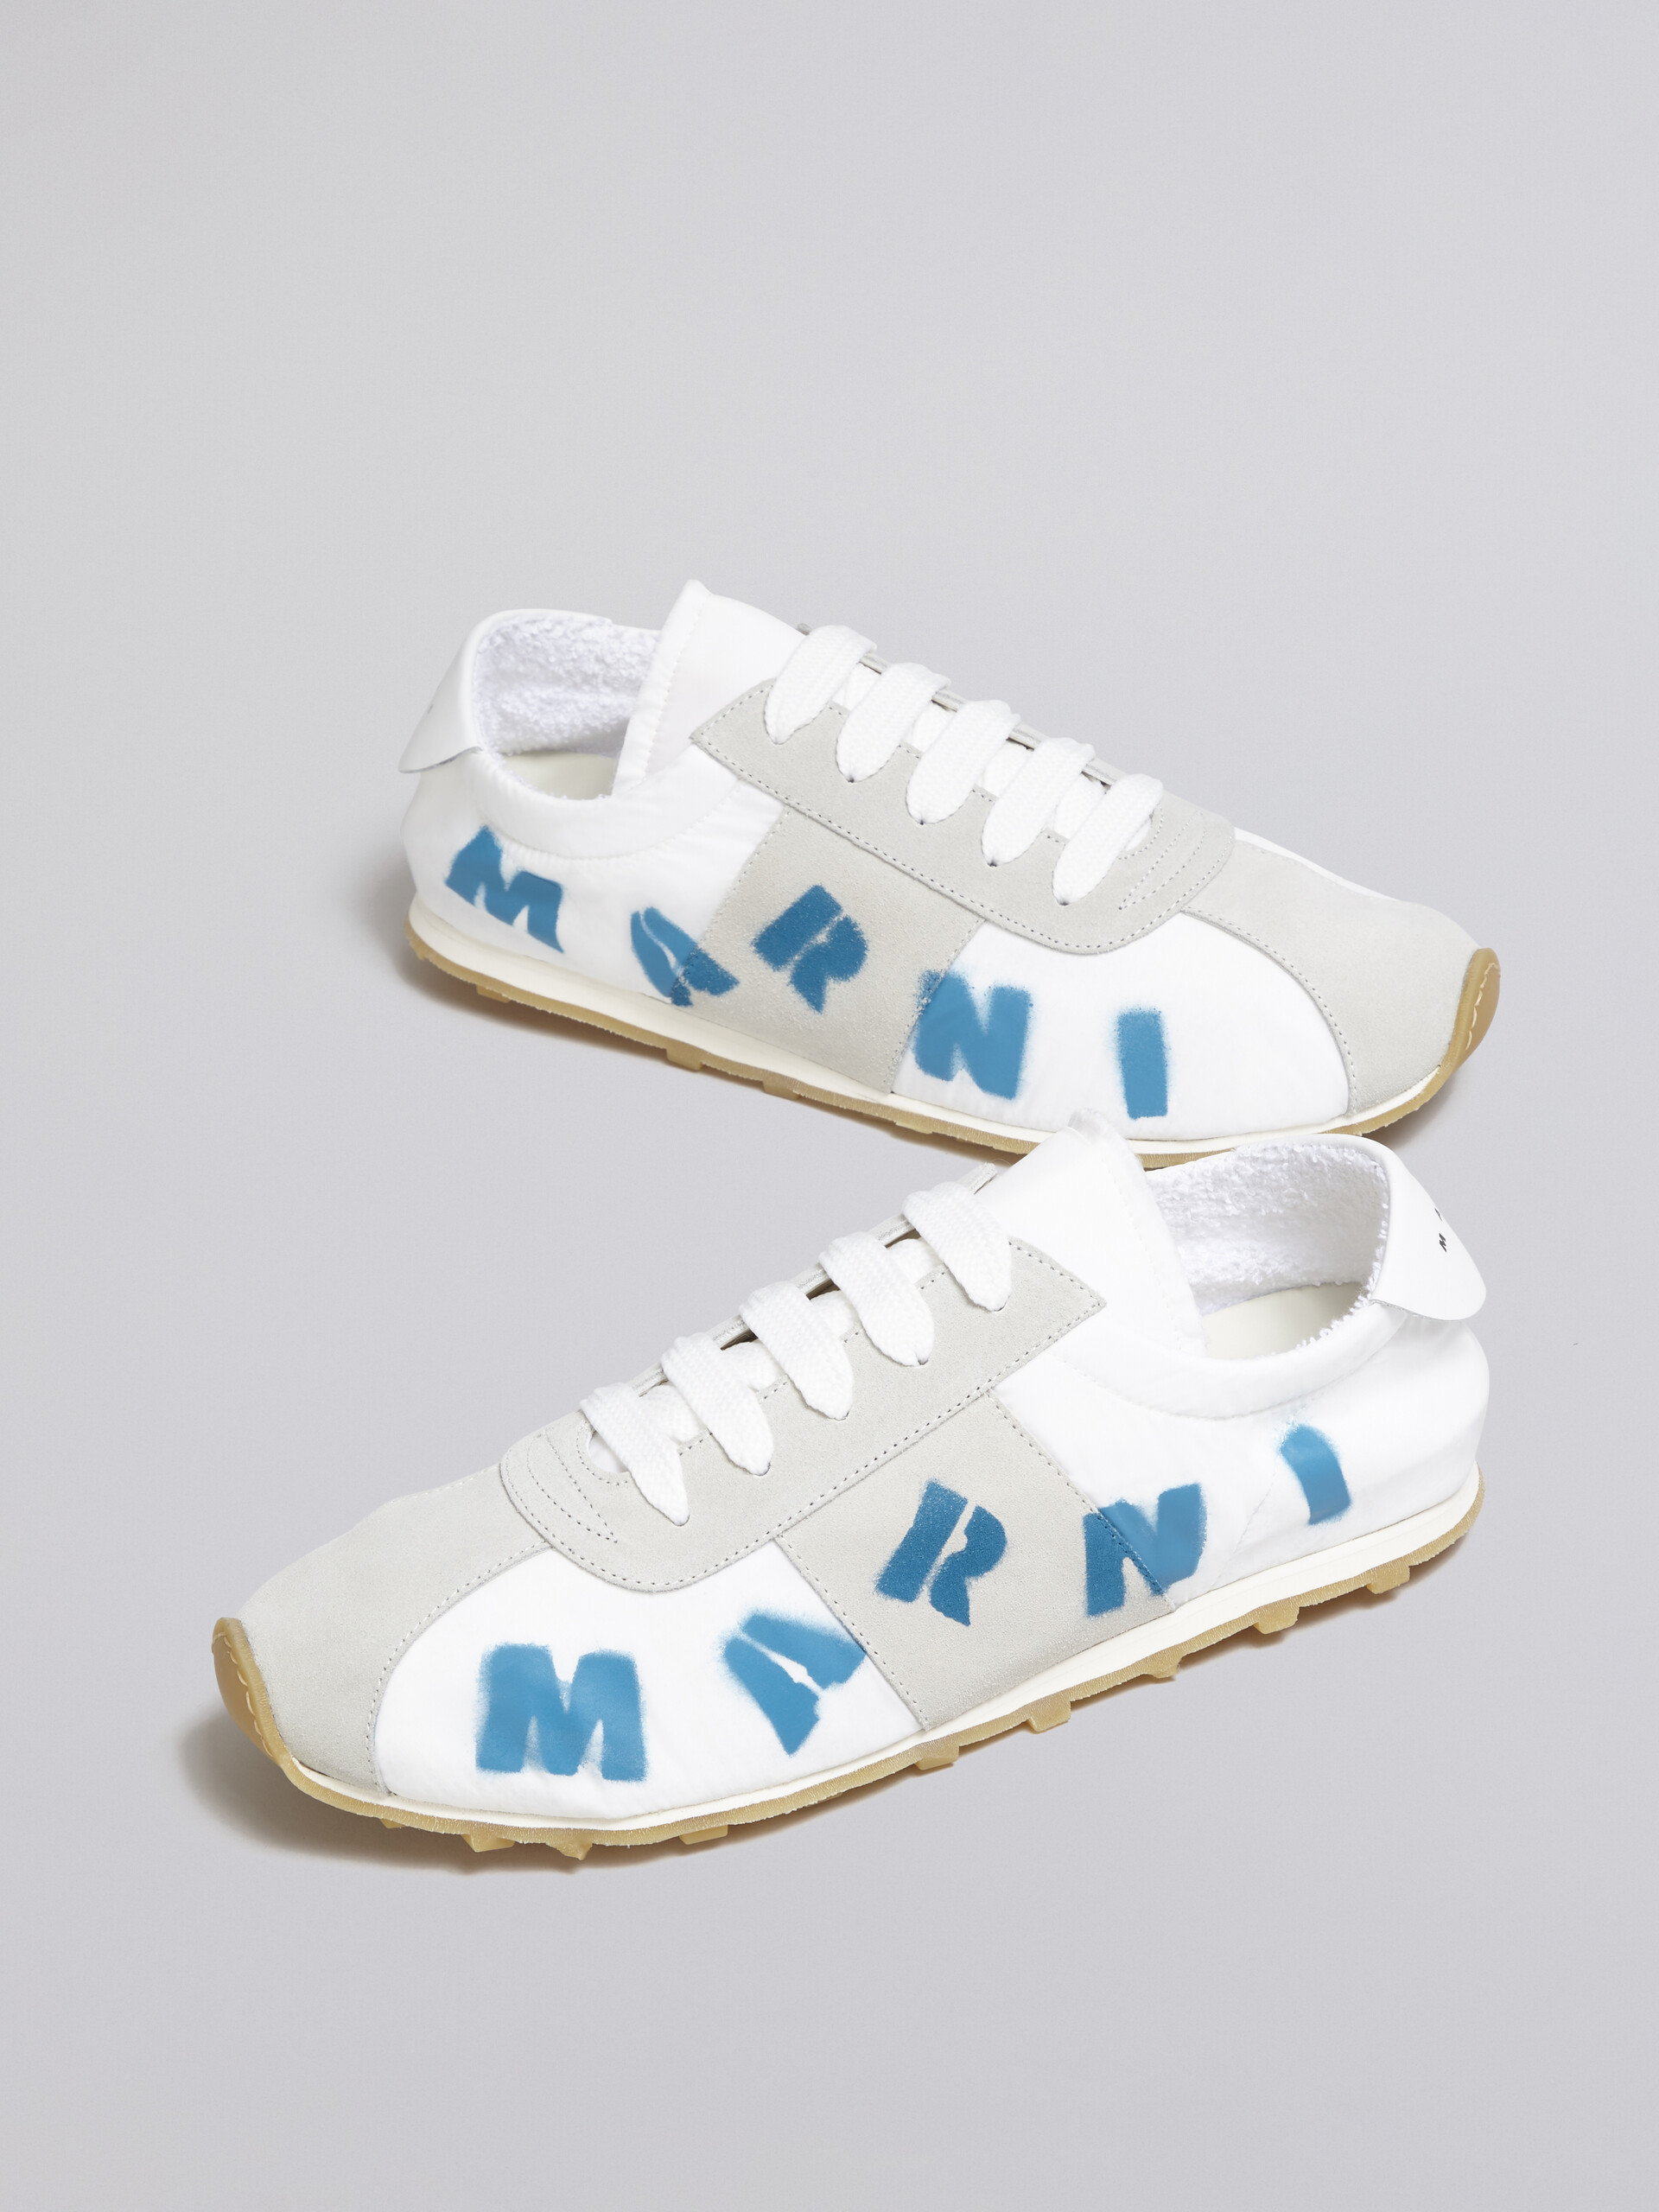 White polyamide sneaker with airbrushed Marni logo - Sneakers - Image 5